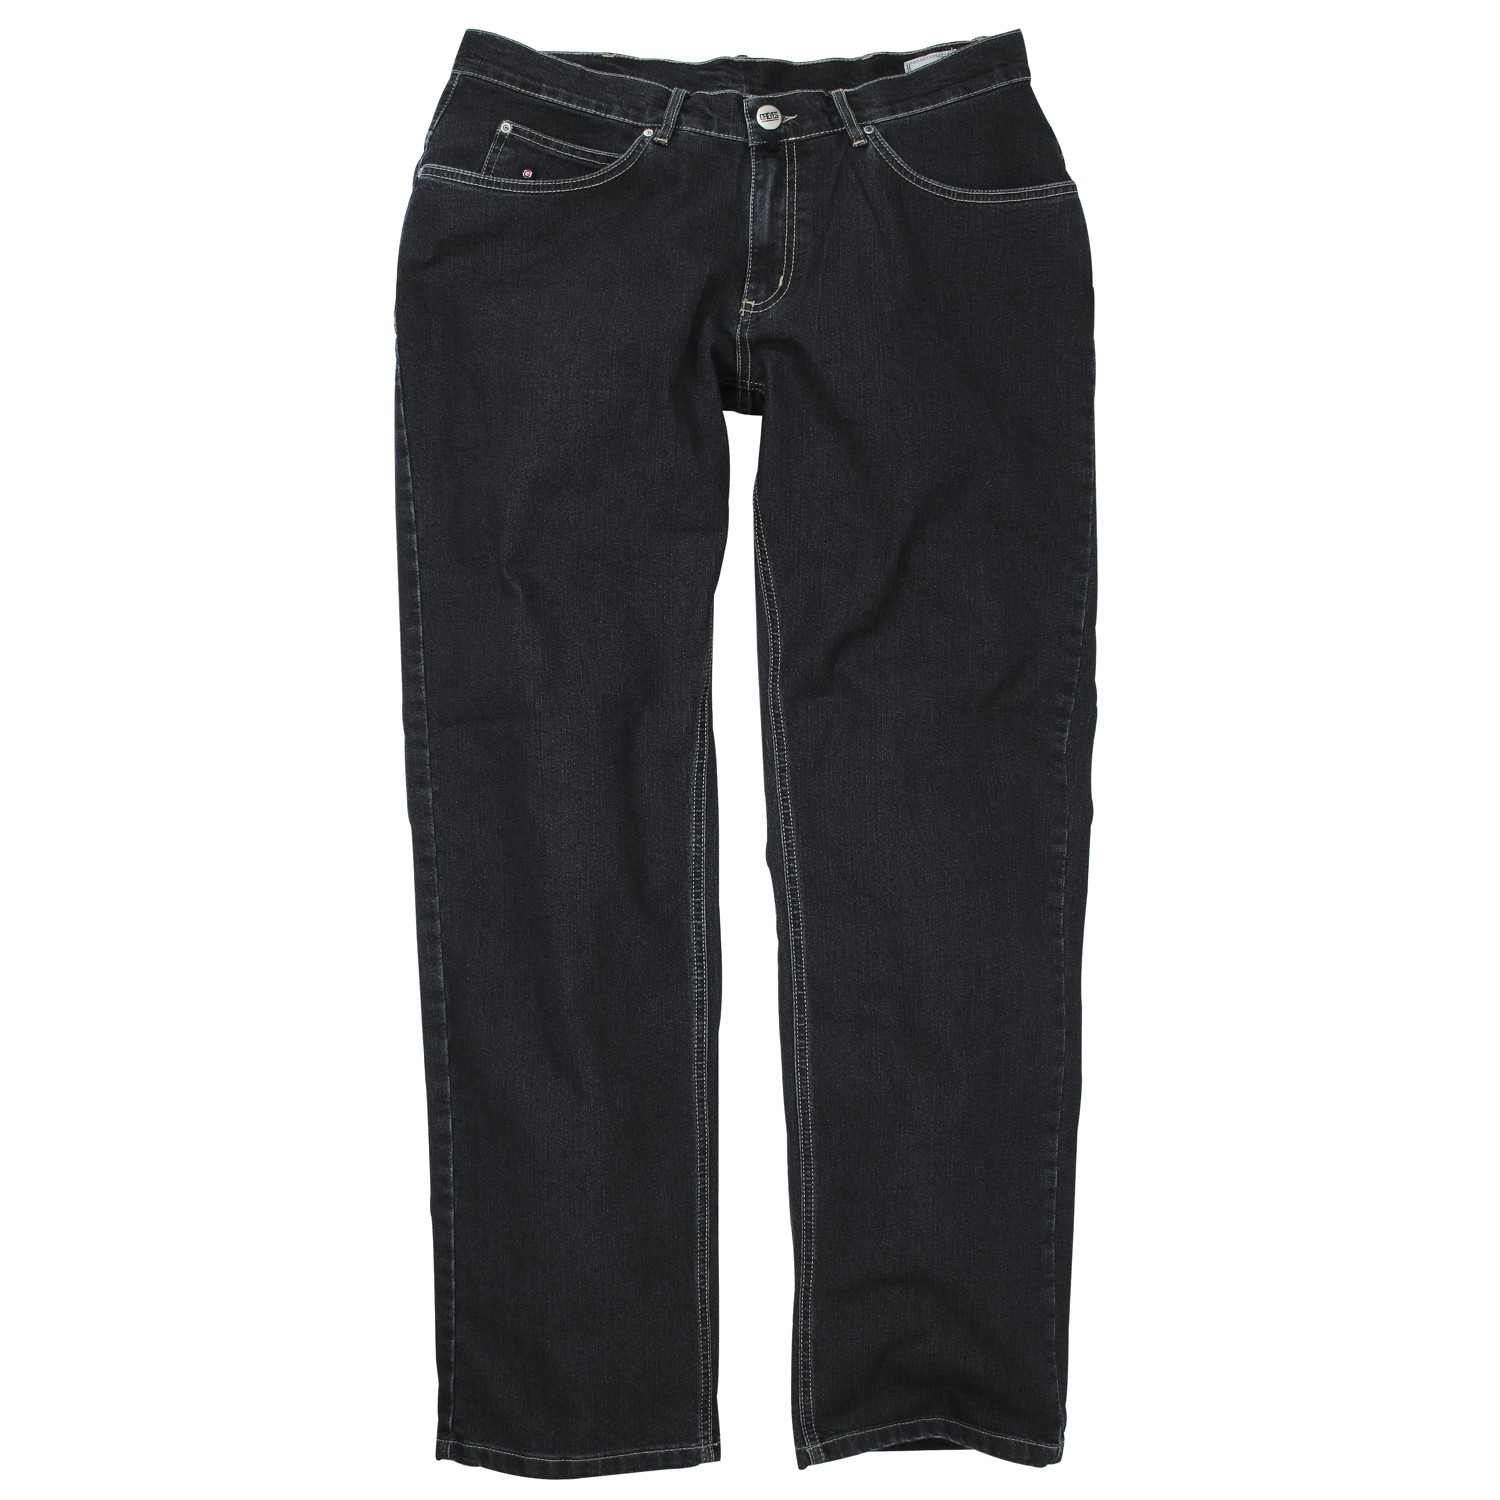 Black strech jeans by Greyes in oversizes up to 70